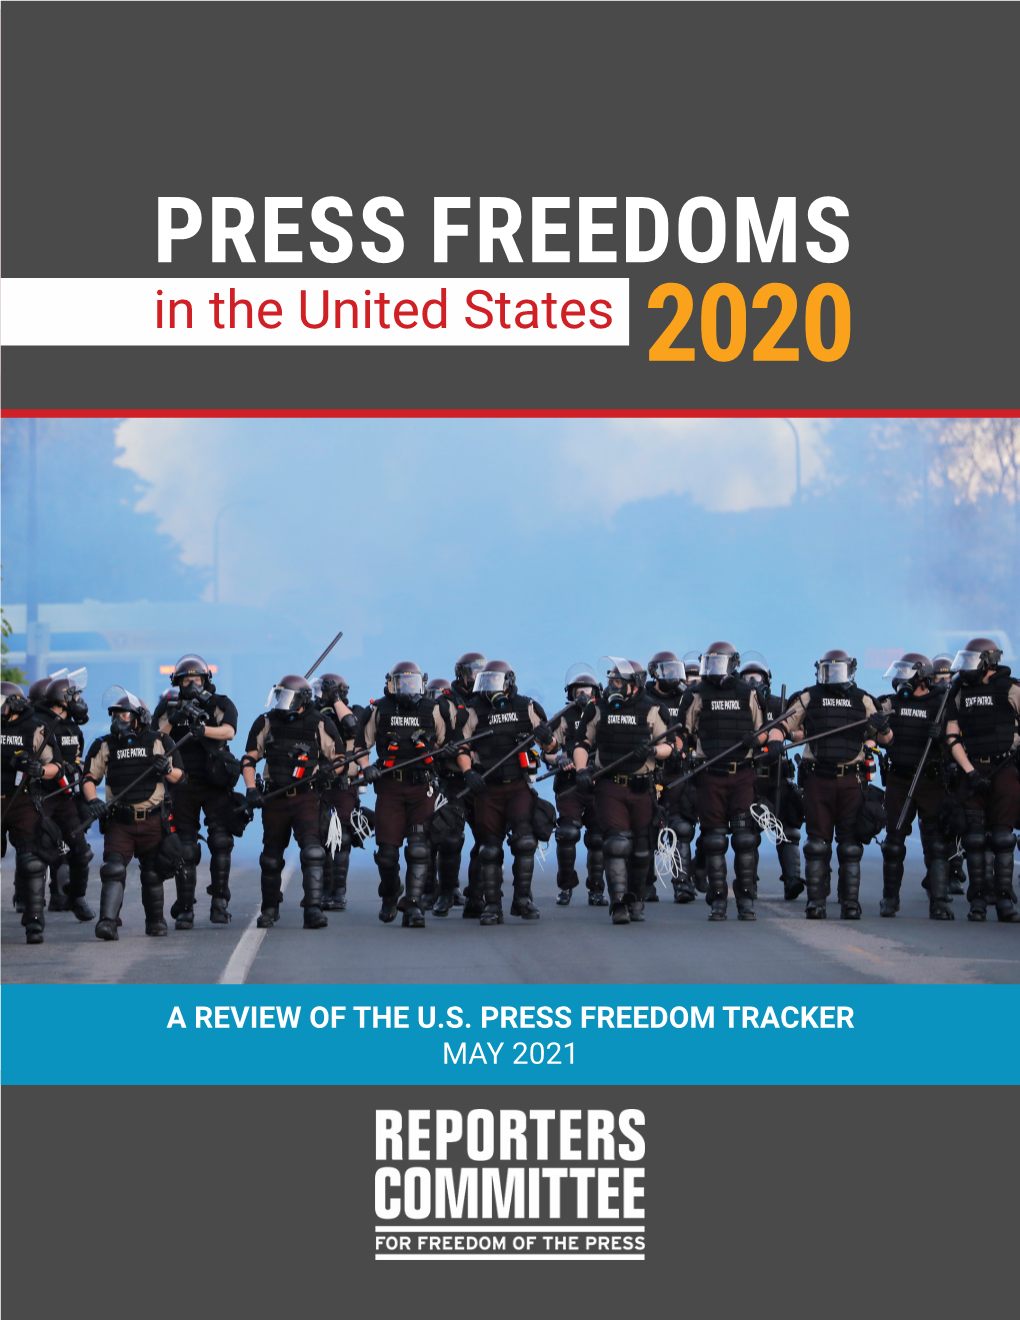 PRESS FREEDOM TRACKER MAY 2021 Press Freedoms in the United States 2020 a REVIEW of the U.S